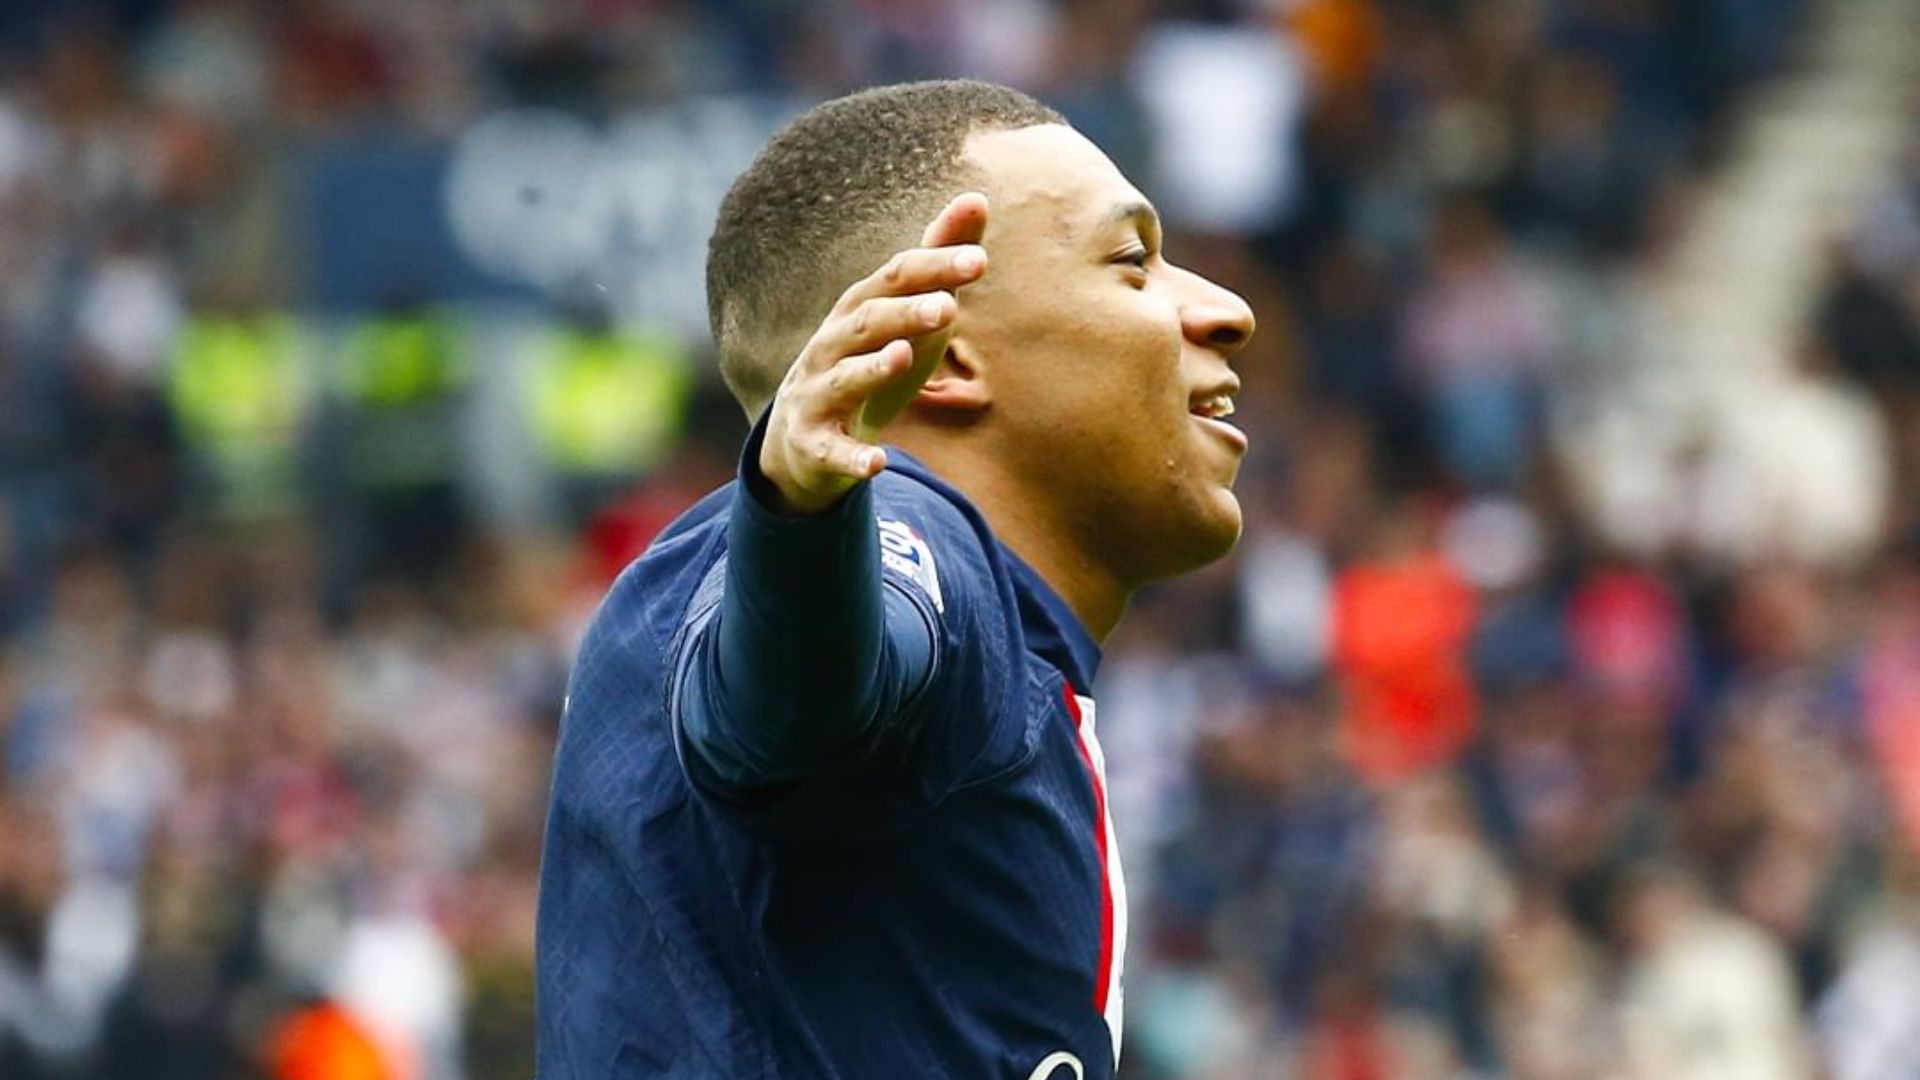 Mbappe in action for PSG